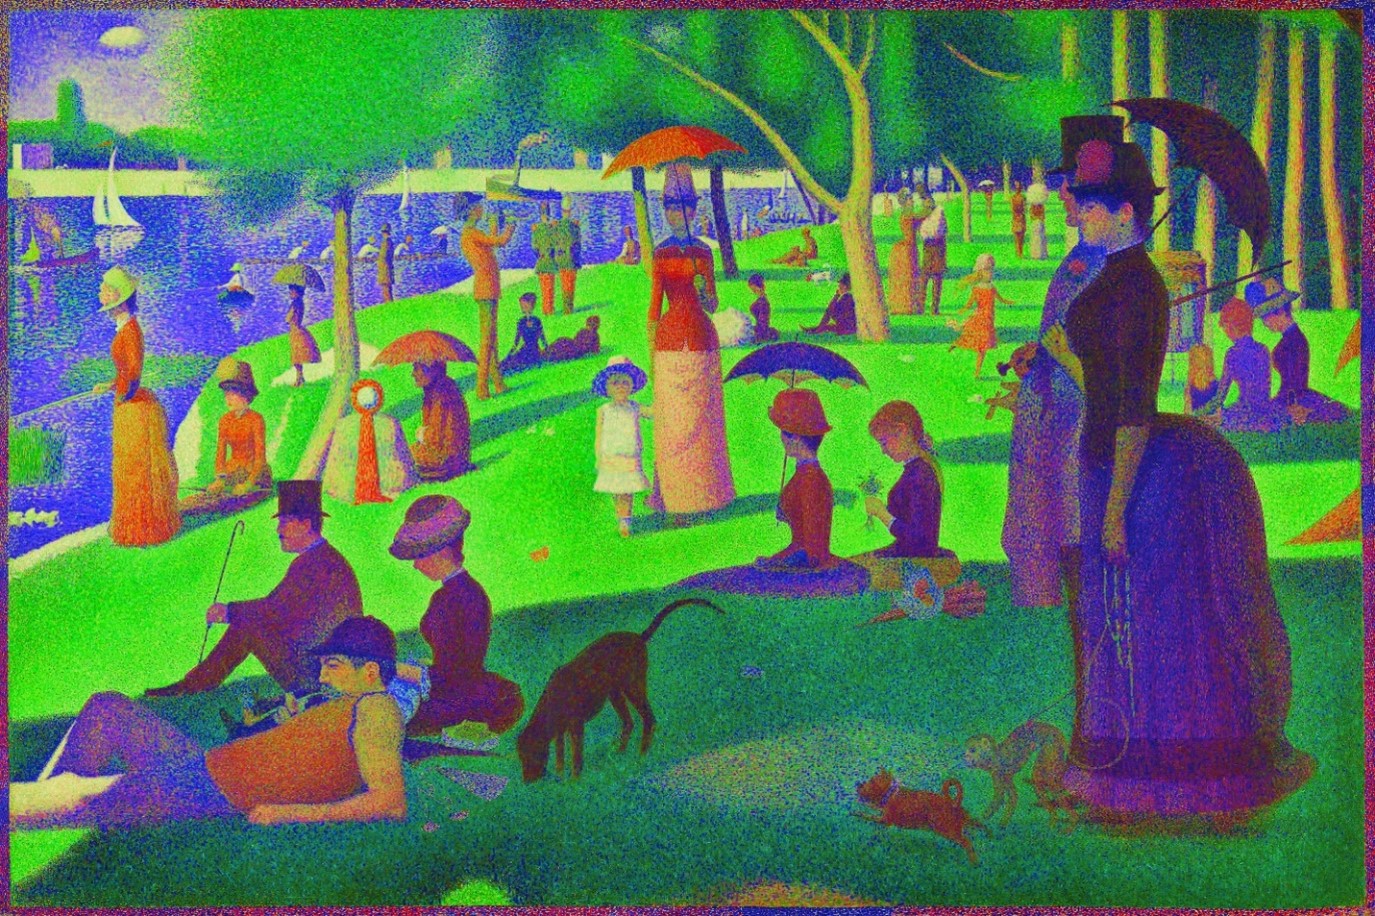 A painting depicts a crowd of individuals gathered in a park along a river. Compared with figure 3, the color palette has been limited to one shade of each color, representing generalization, which preserves privacy by creating broader groups